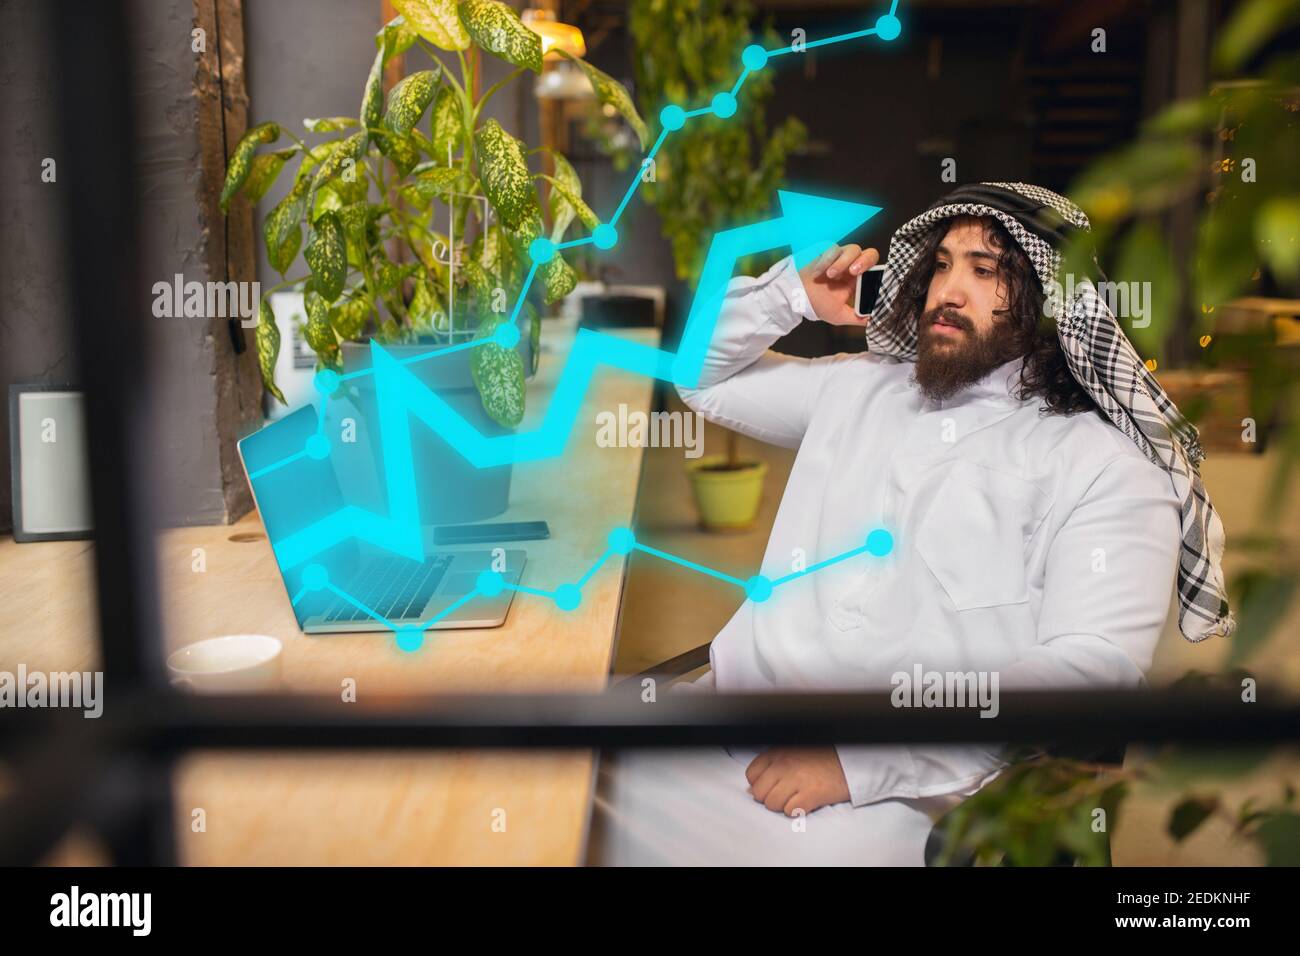 On the phone. Arabian businessman working in office, business centre using device, gadget. Modern saudi lifestyle. Man in traditional wear looks confident, busy. Ethnicity, finance, income uncrease Stock Photo